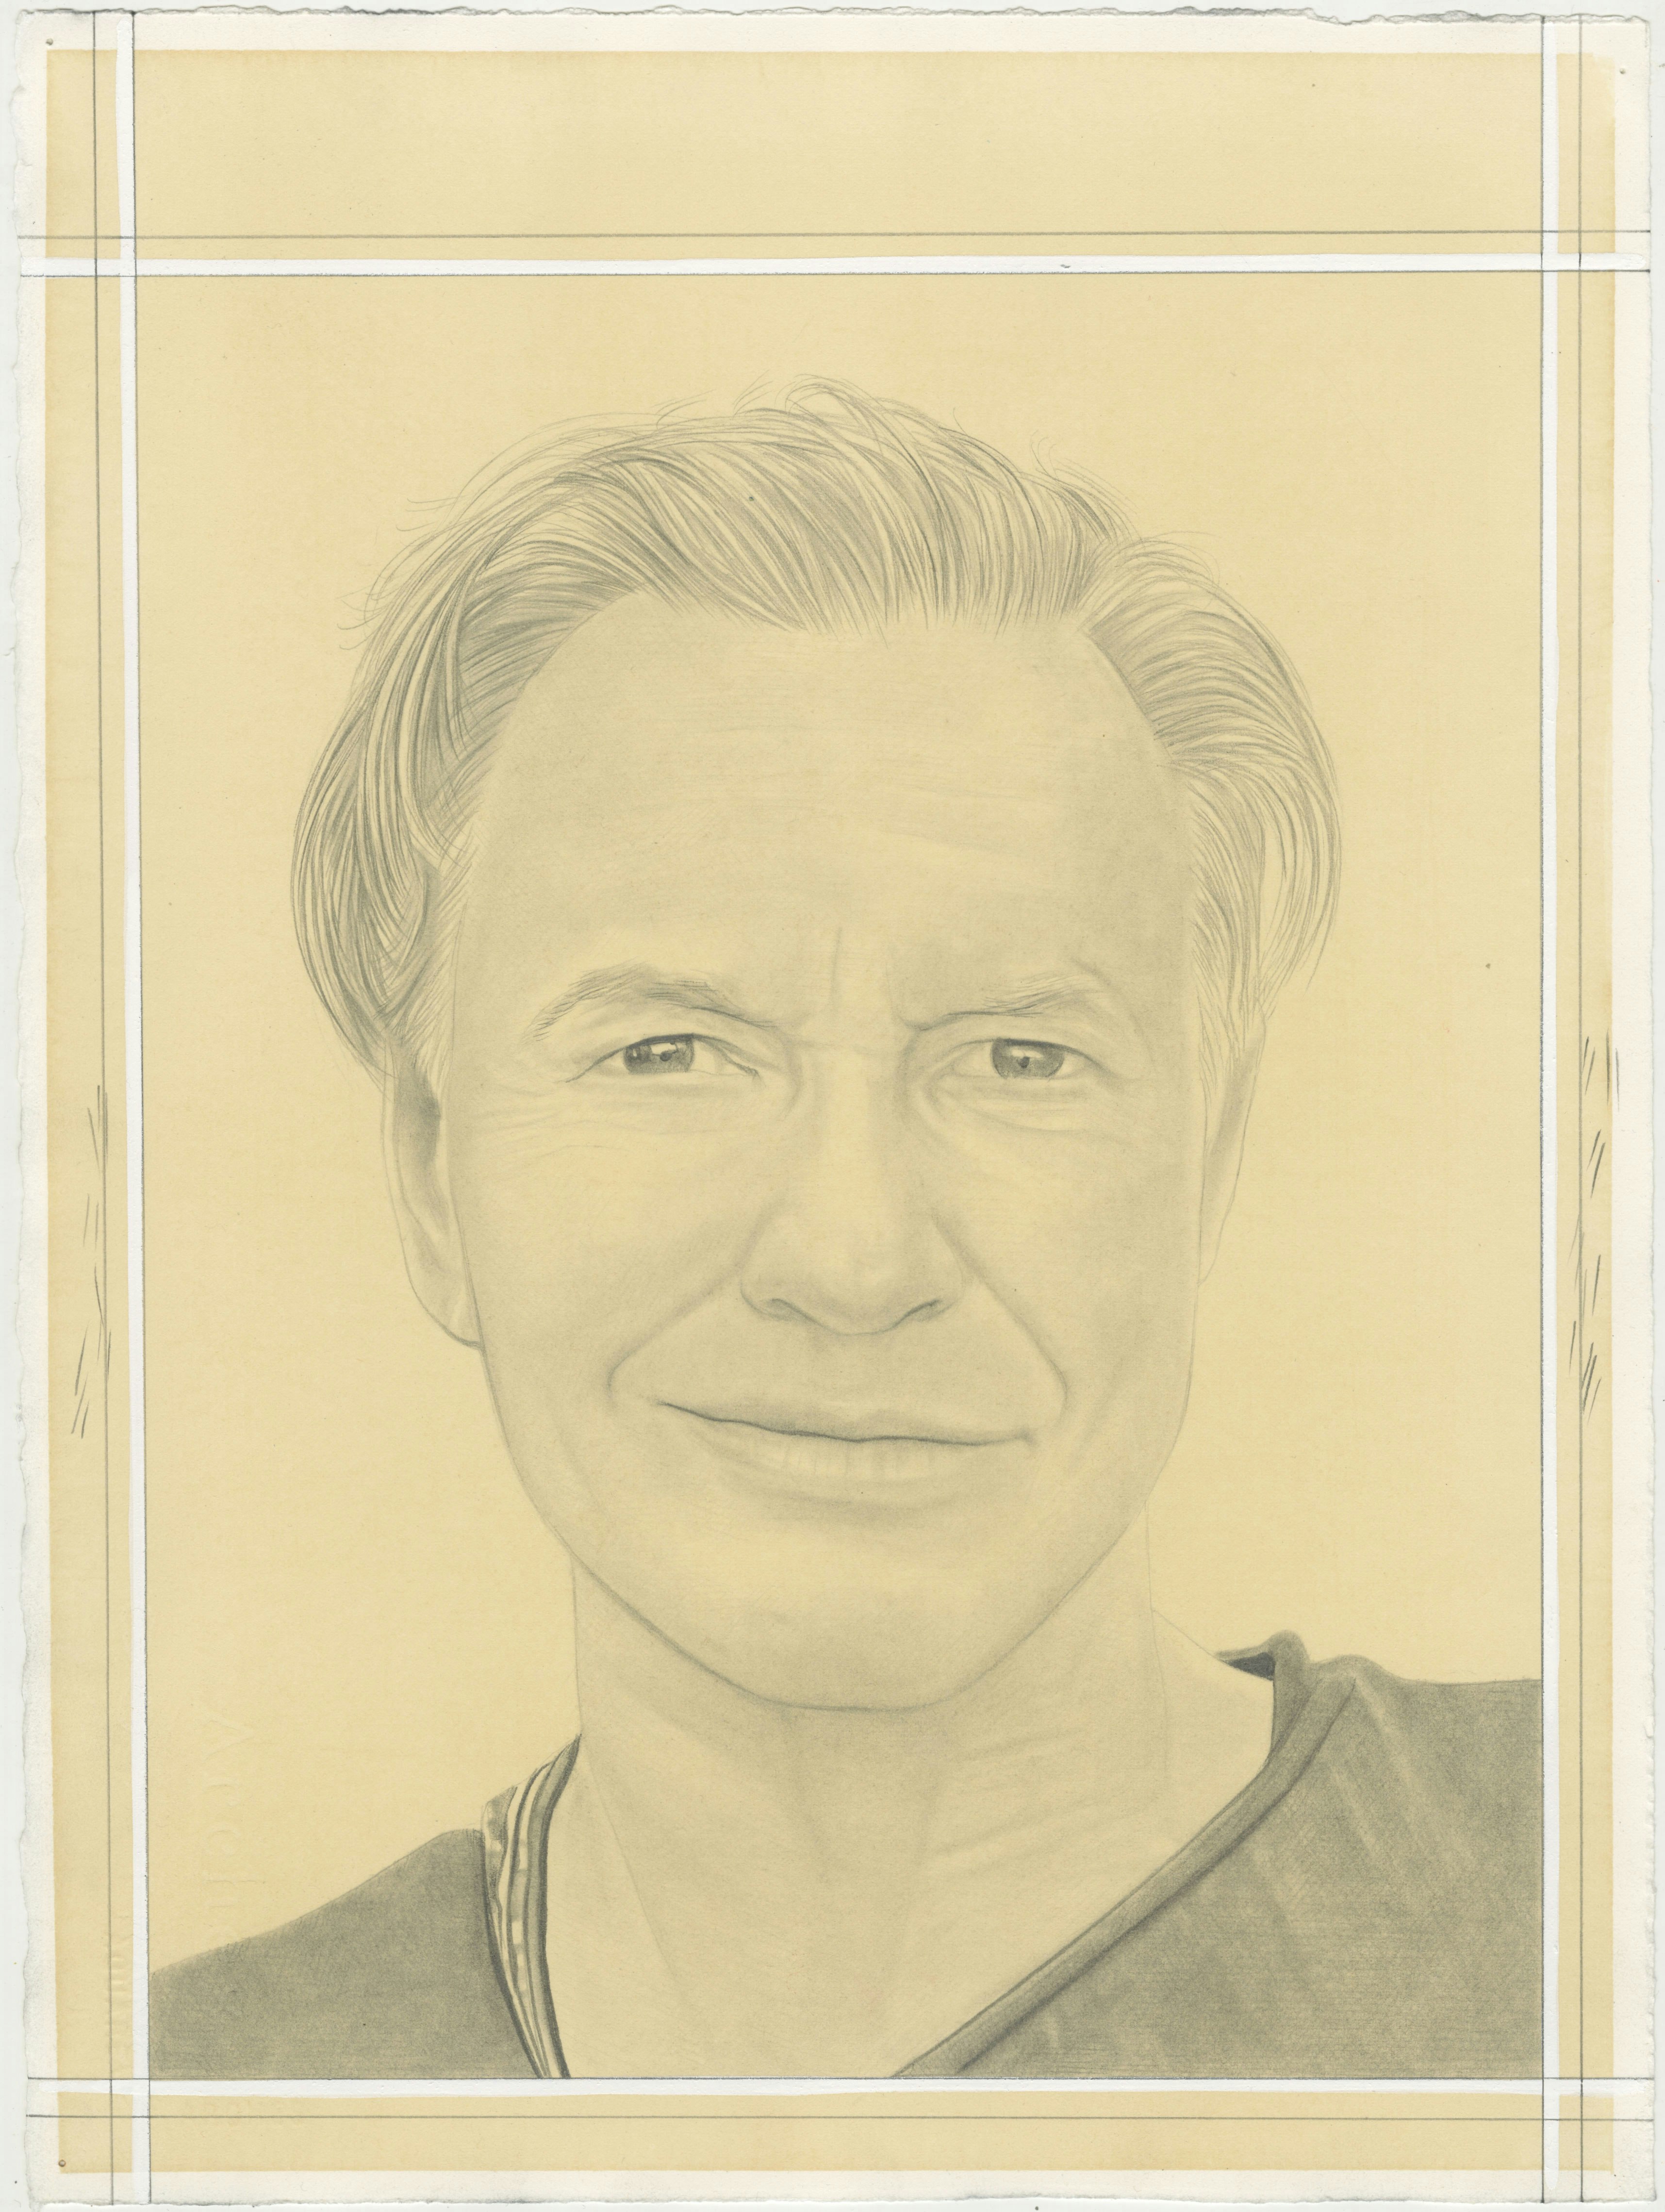 Portrait of Ashley Bickerton, pencil on paper by Phong H. Bui.